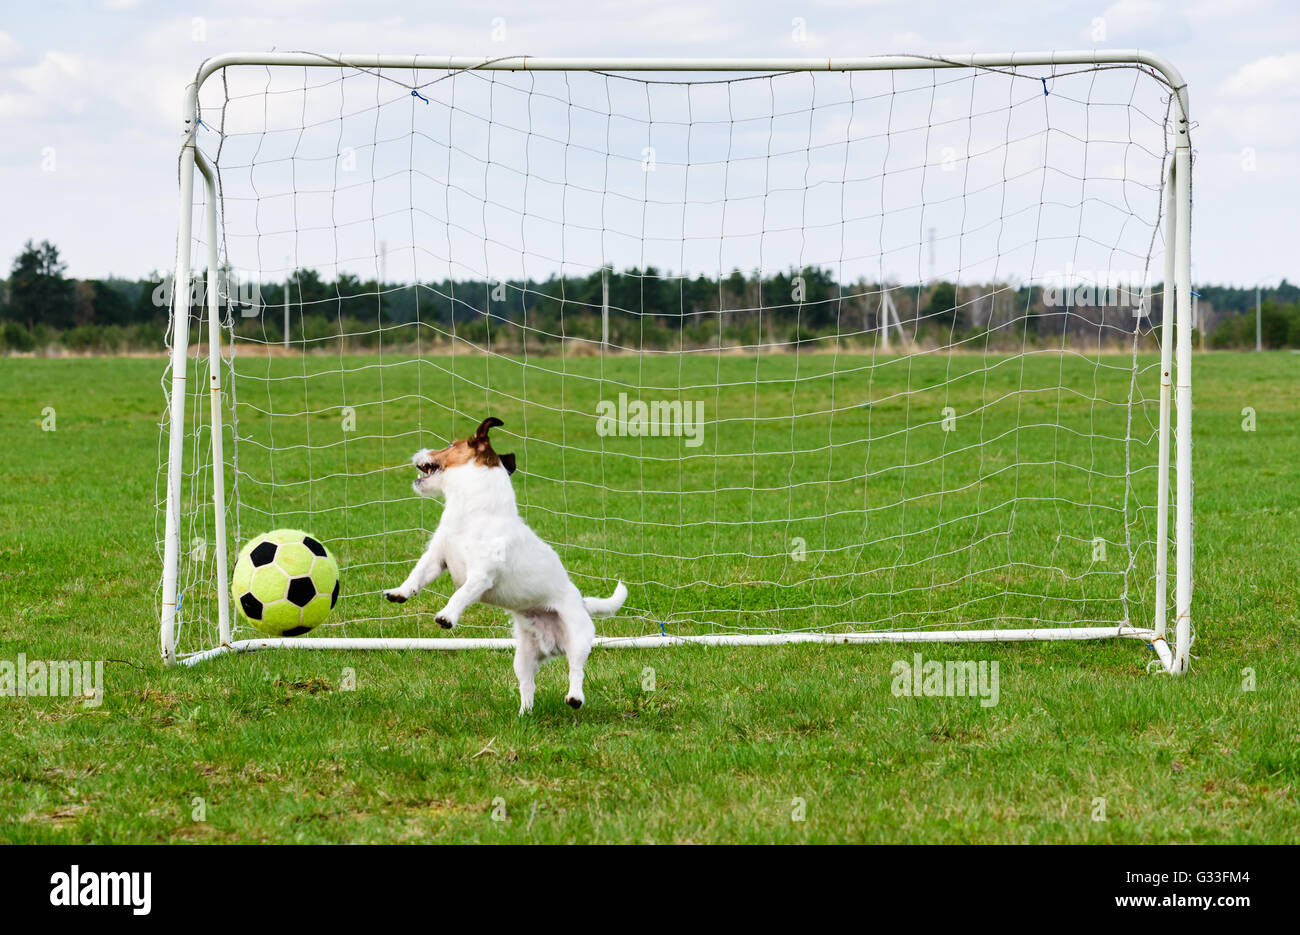 Scoring soccer goal to funny keeper at football pitch Stock Photo